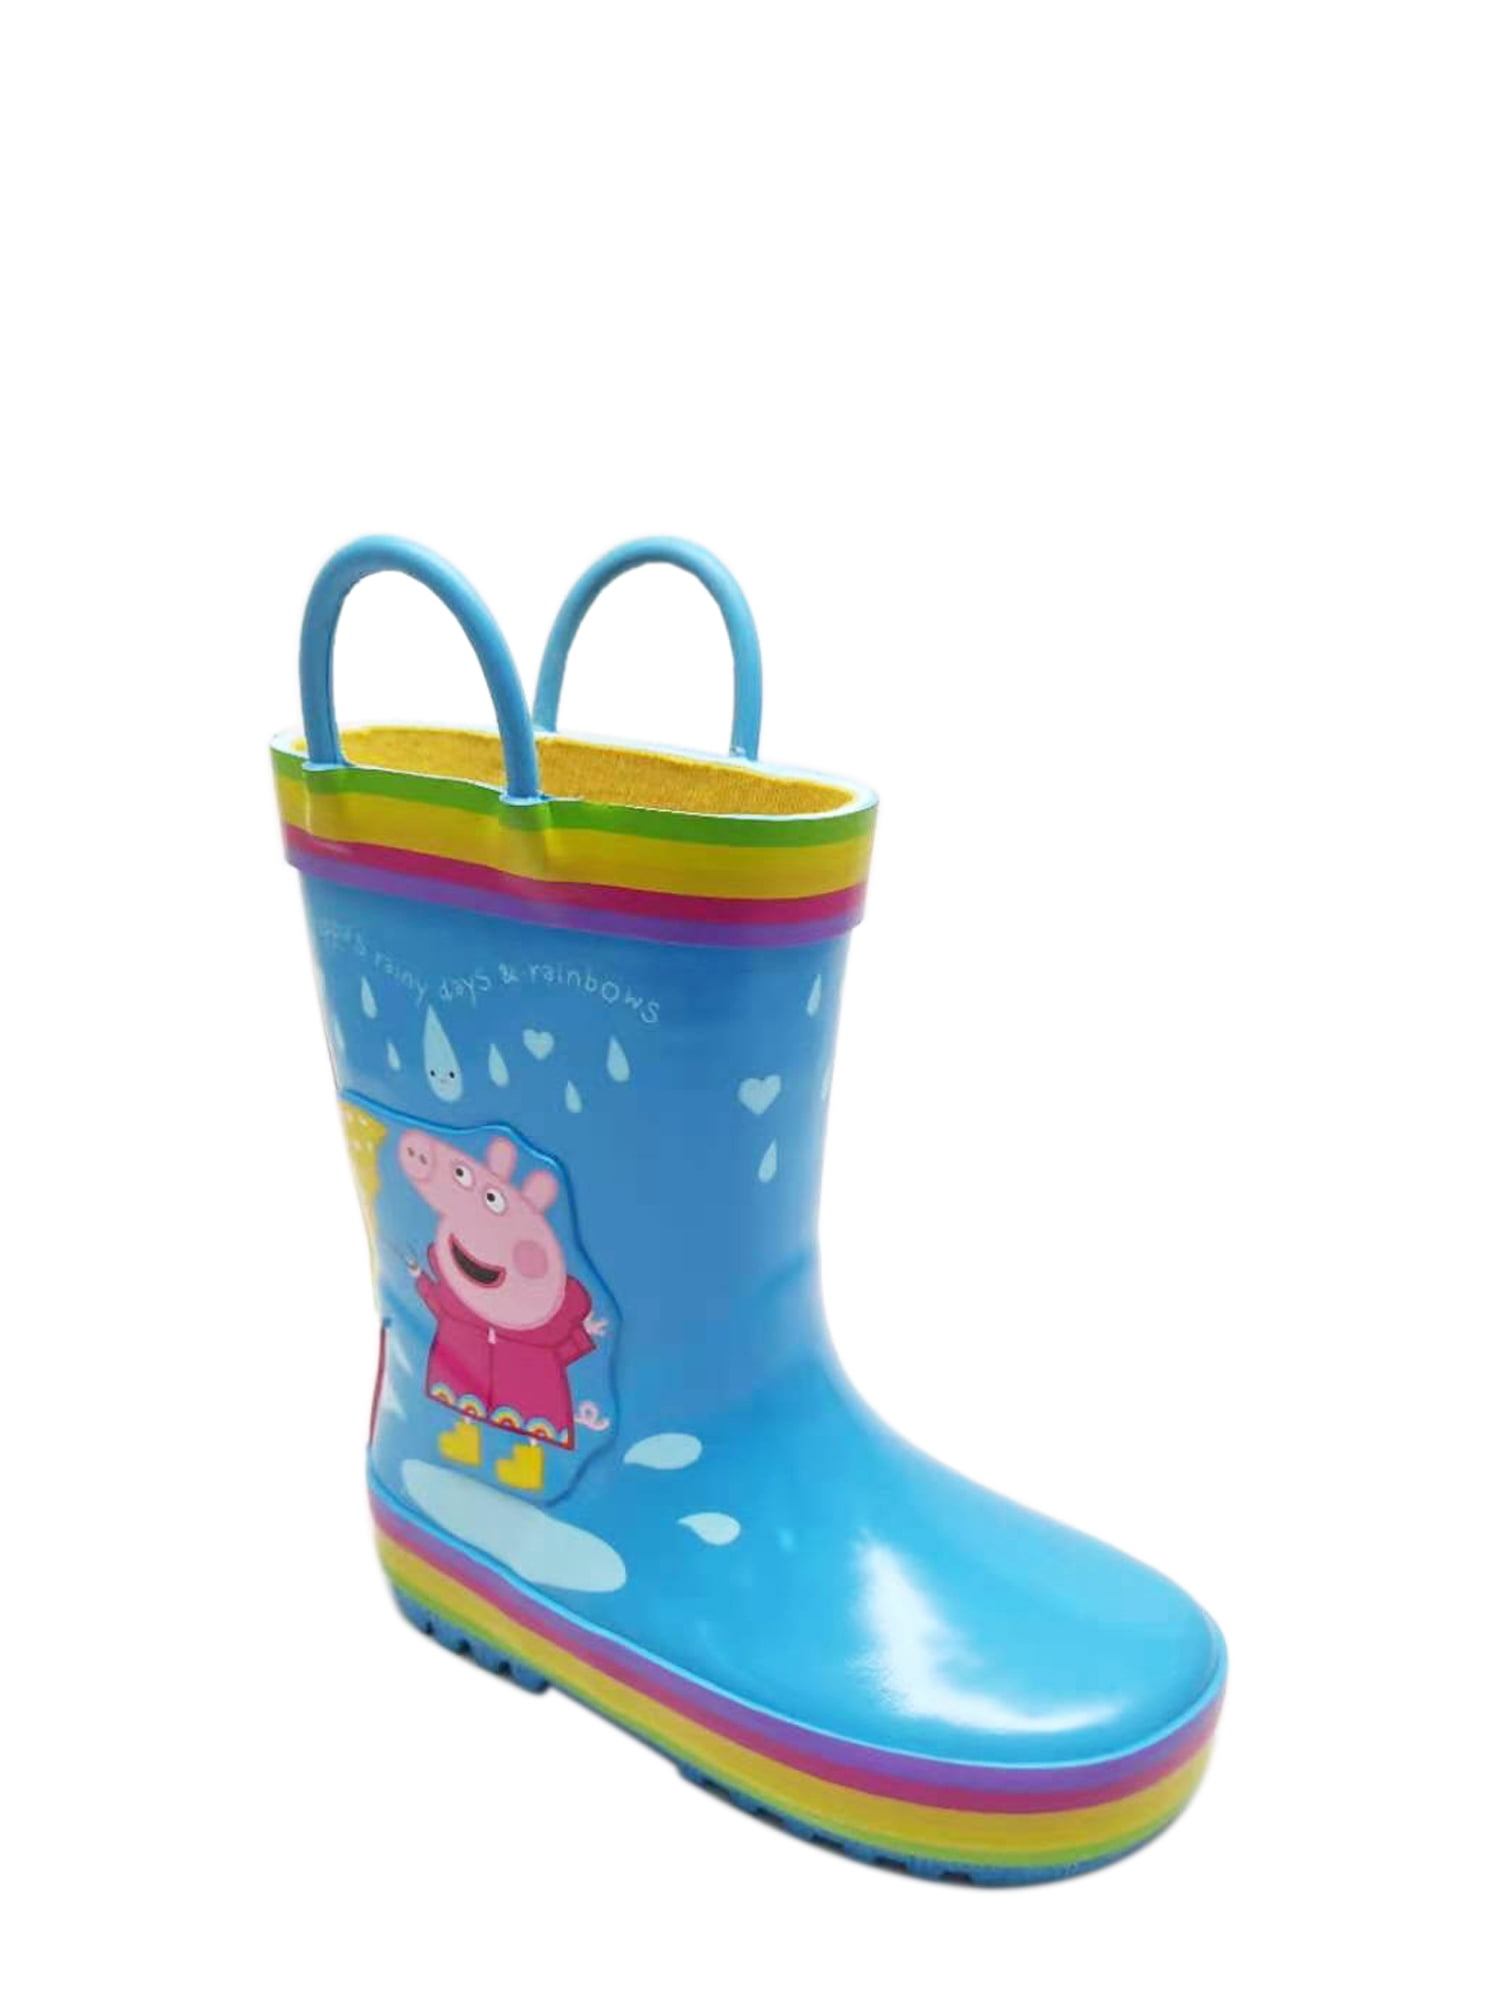 Girls Toddler Nick Jr Peppa Pig Winter Wellies Shoes Boots Pink Purple Size 6-12 